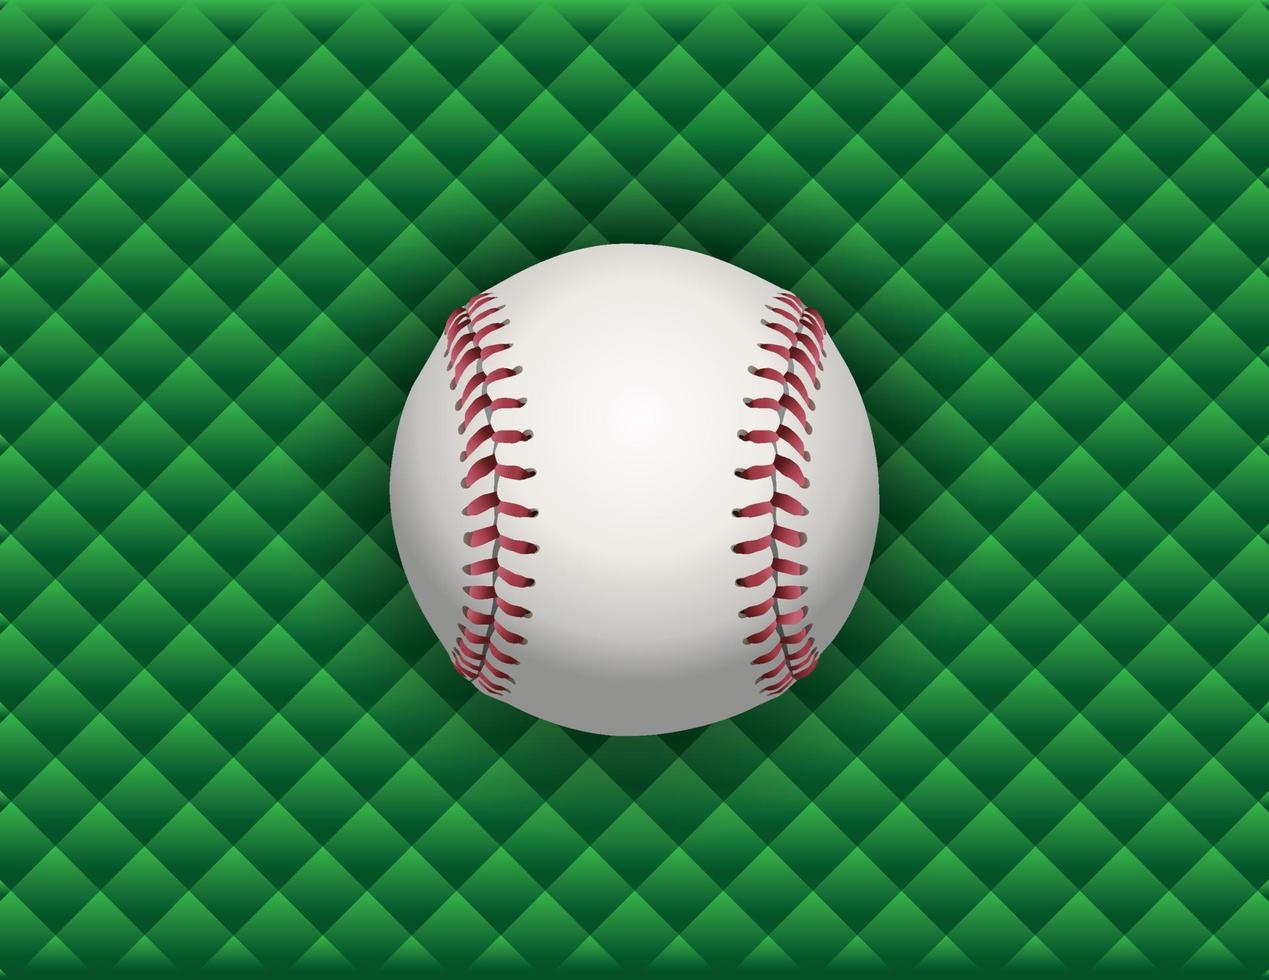 Baseball Illustration on a Green Checkered Background vector